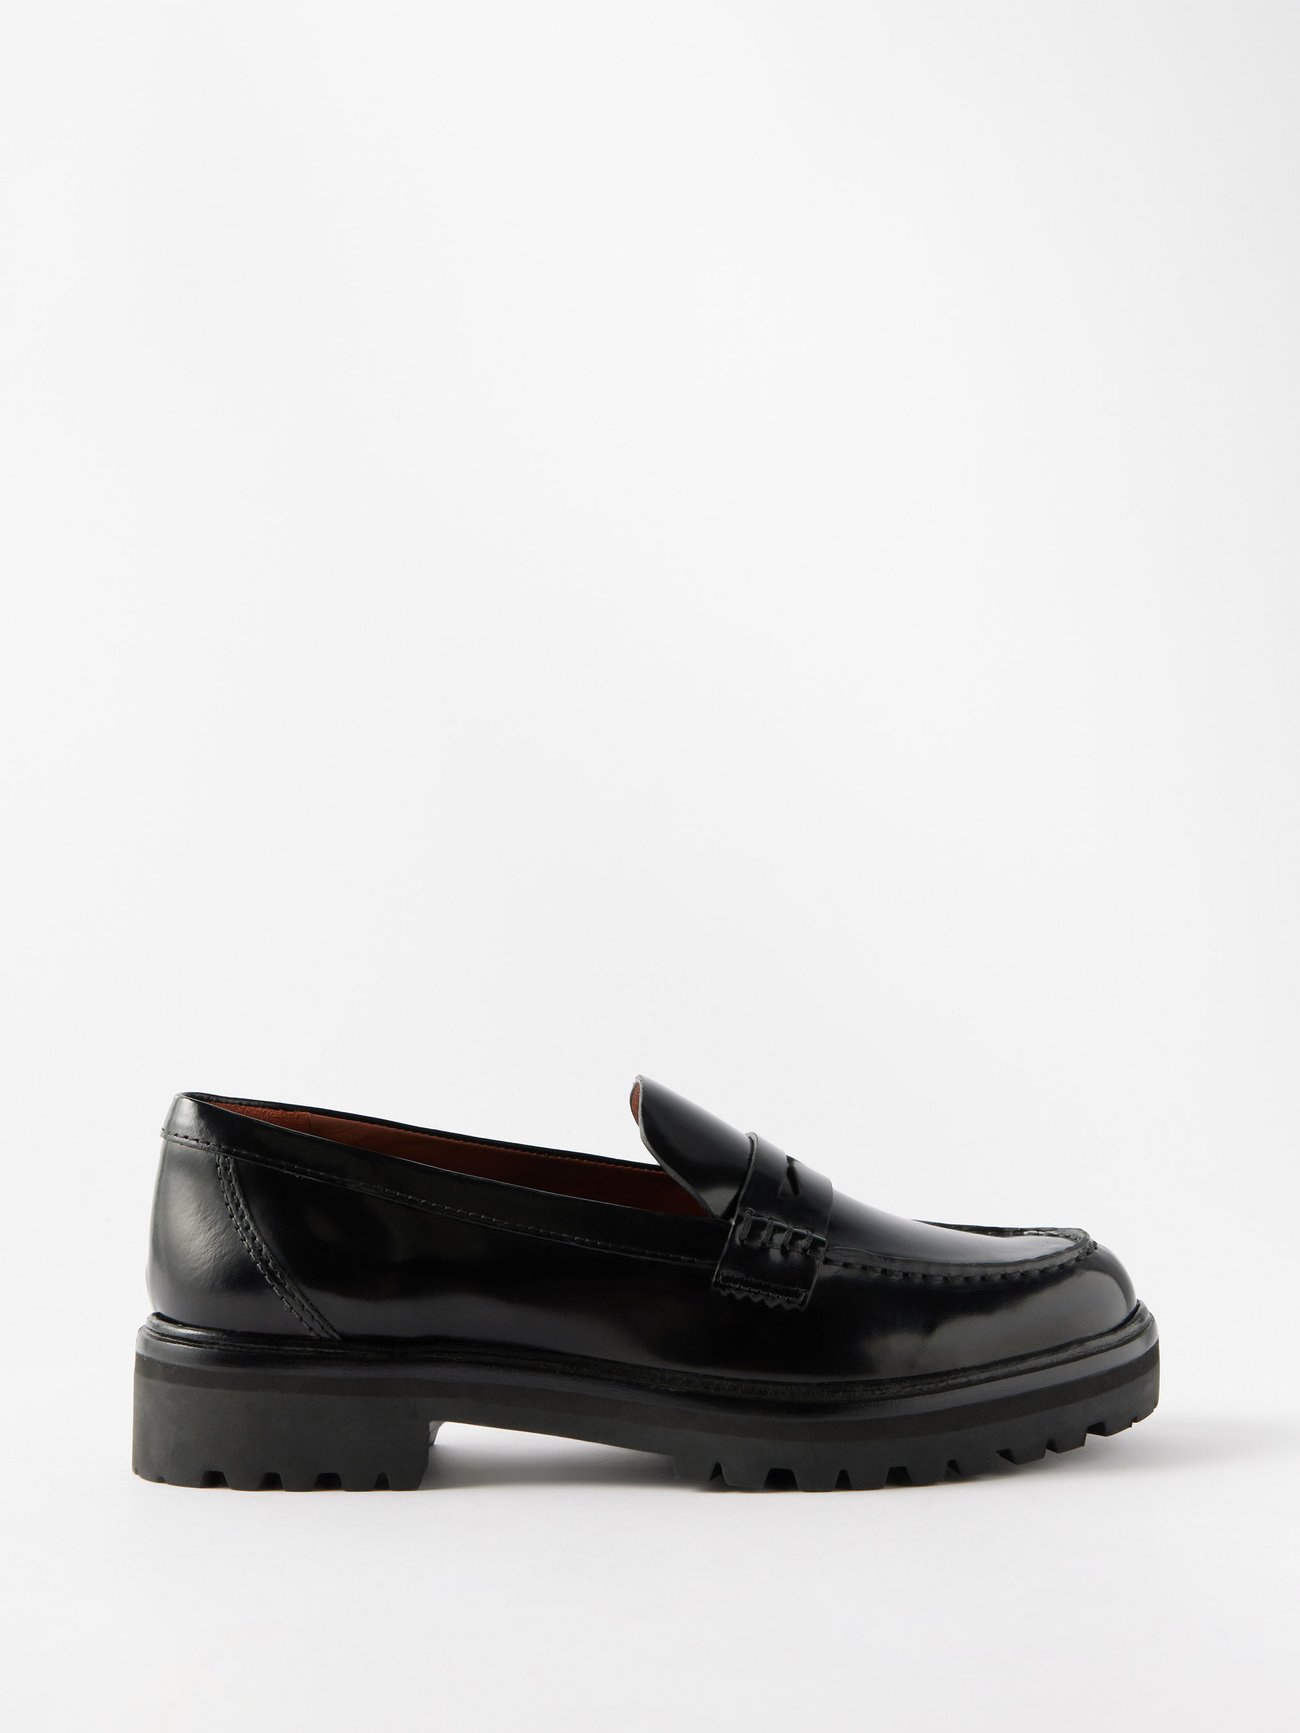 Black Agathea leather loafers | Reformation | MATCHES UK